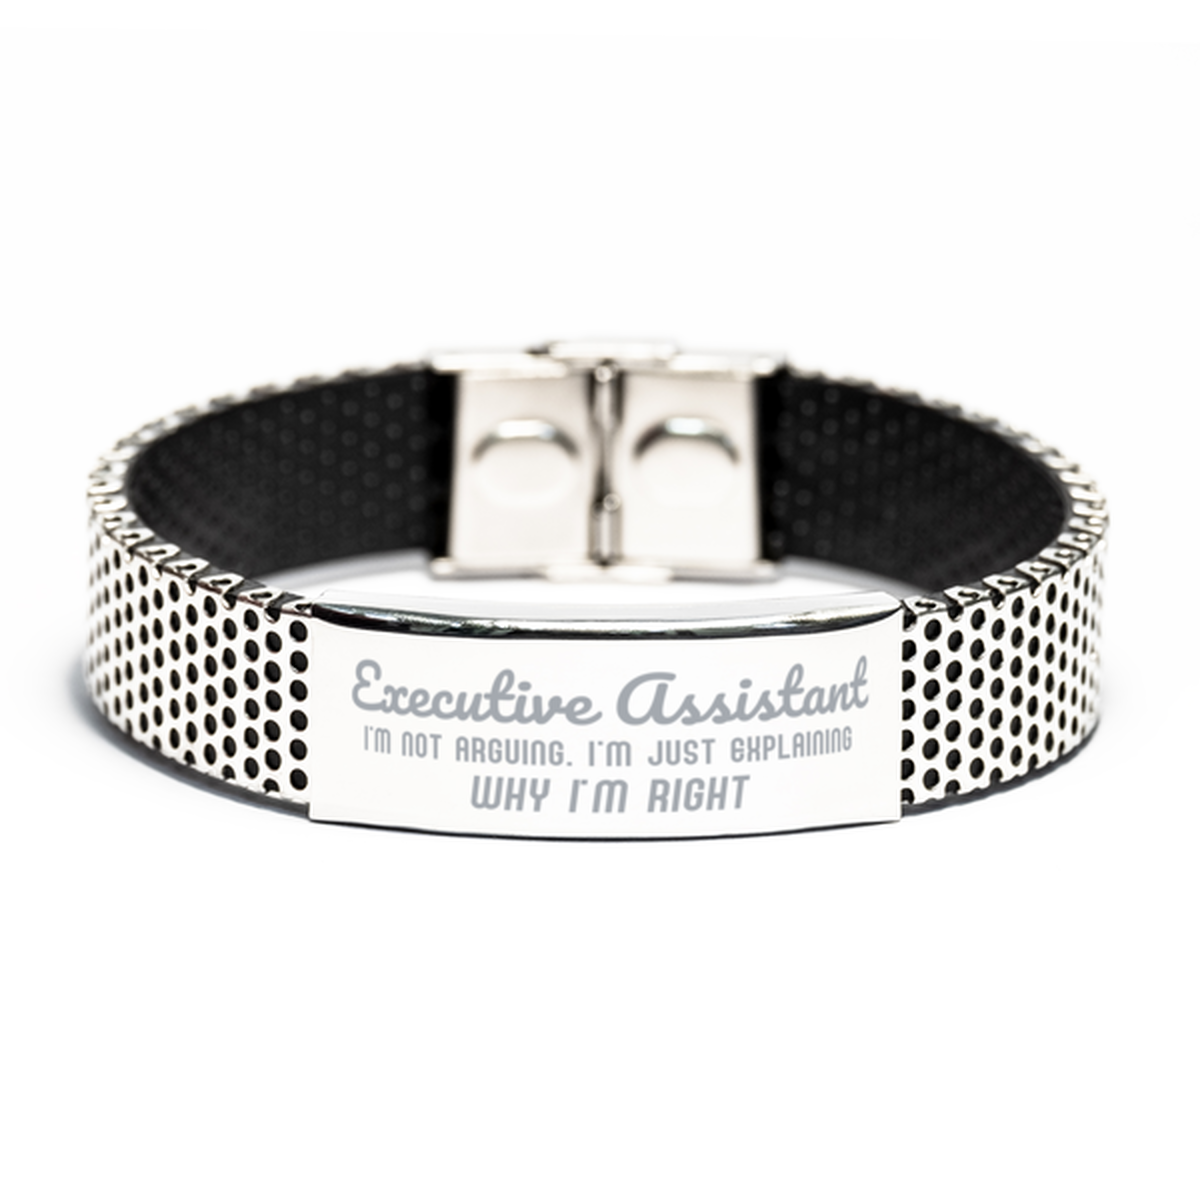 Executive Assistant I'm not Arguing. I'm Just Explaining Why I'm RIGHT Stainless Steel Bracelet, Funny Saying Quote Executive Assistant Gifts For Executive Assistant Graduation Birthday Christmas Gifts for Men Women Coworker